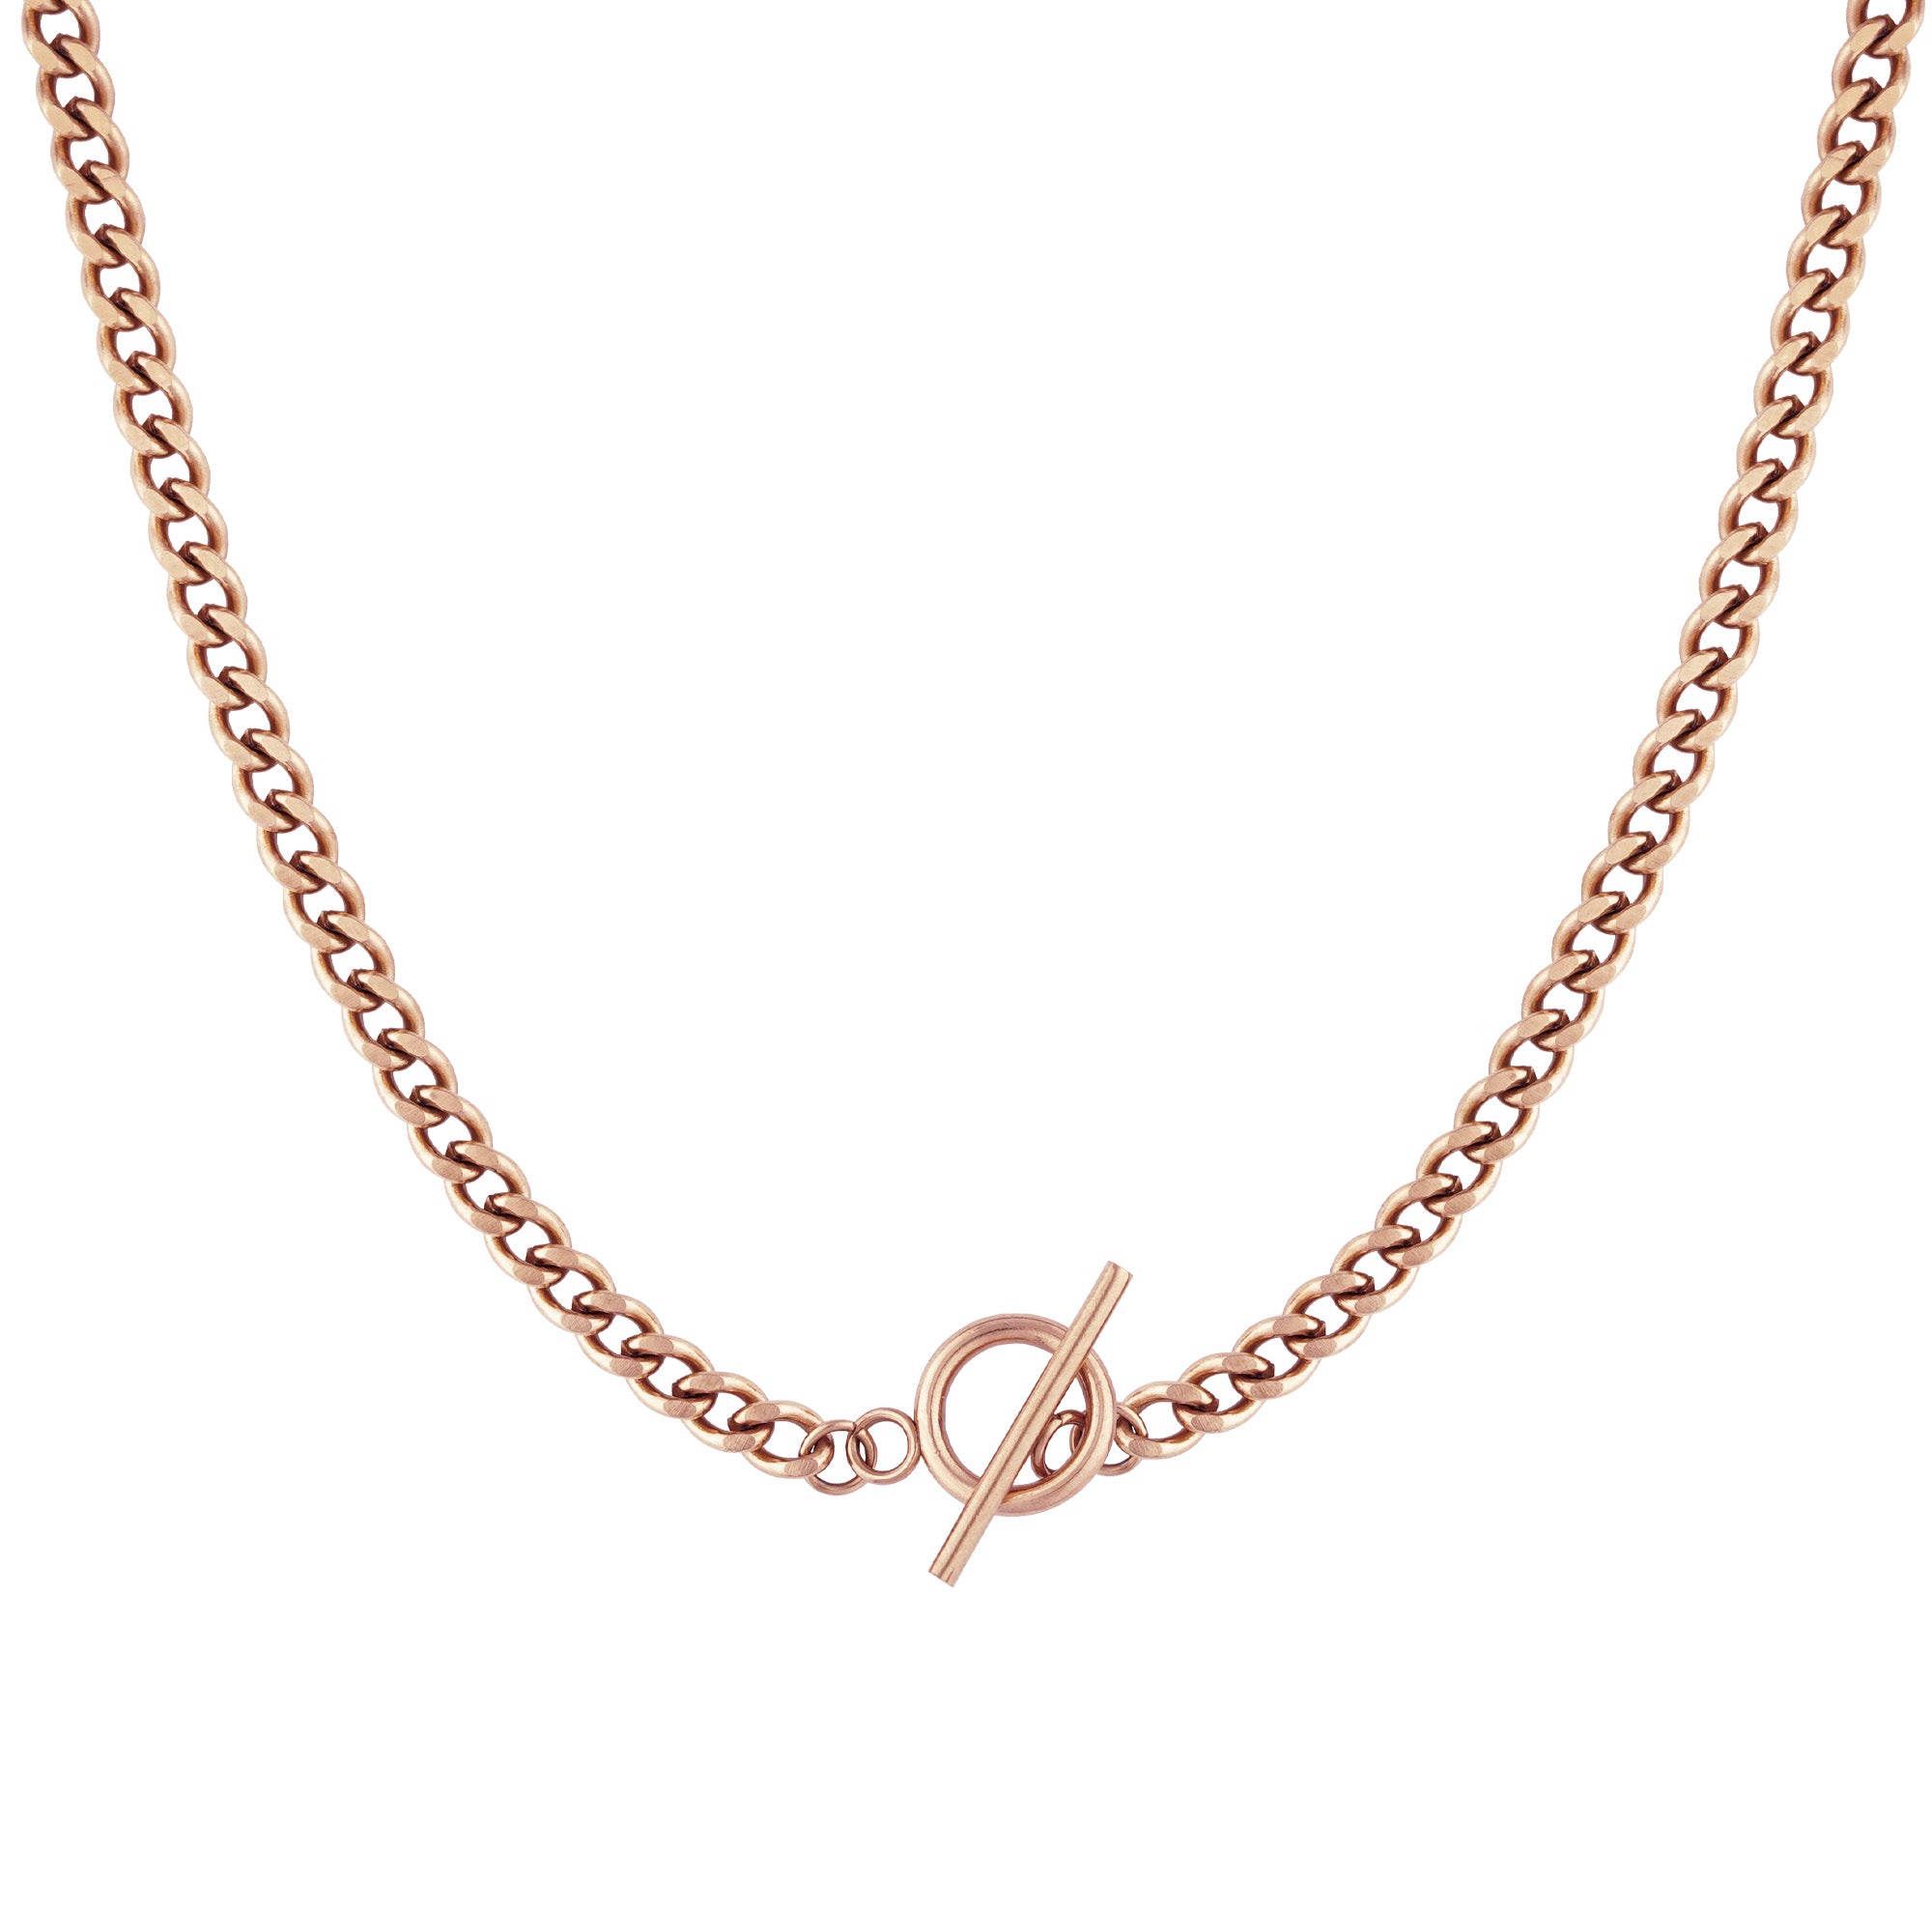 Jucar necklace from Five Jwlry, designed in Montreal, Canada. Features a Cuban chain link in rose gold colored, ultra-resistant 316L stainless steel with a distinctive circular toggle clasp closure.